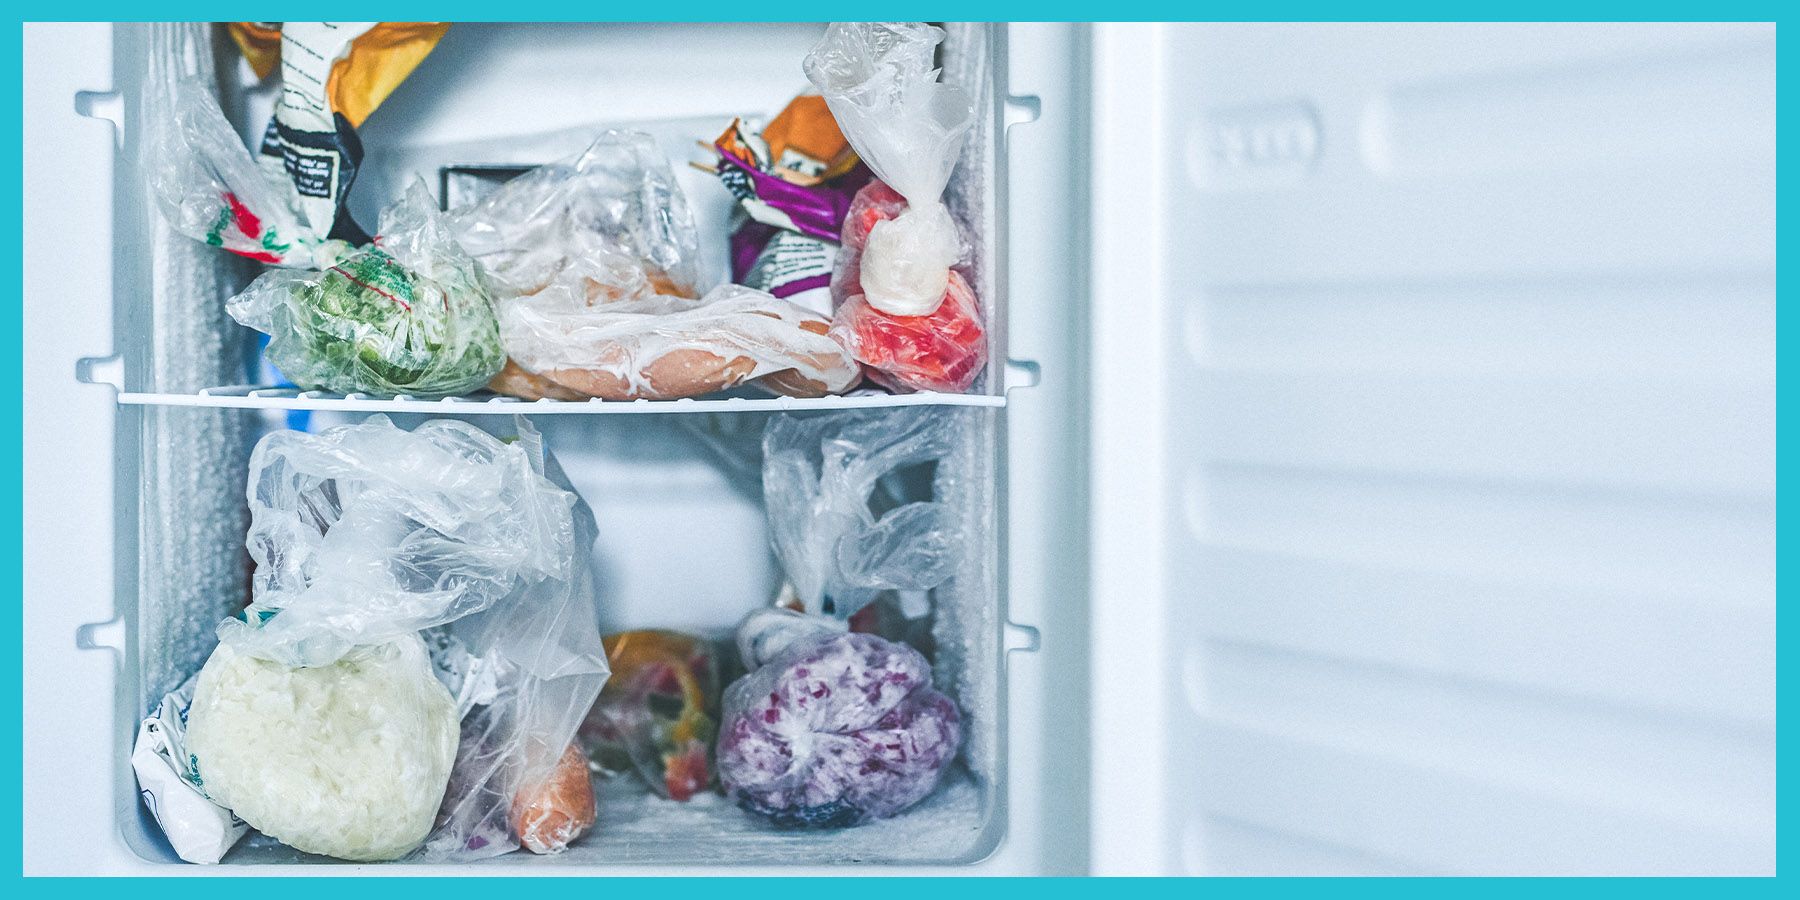 What Is Freezer Burn? - How To Prevent Freezer Burn On Your Food